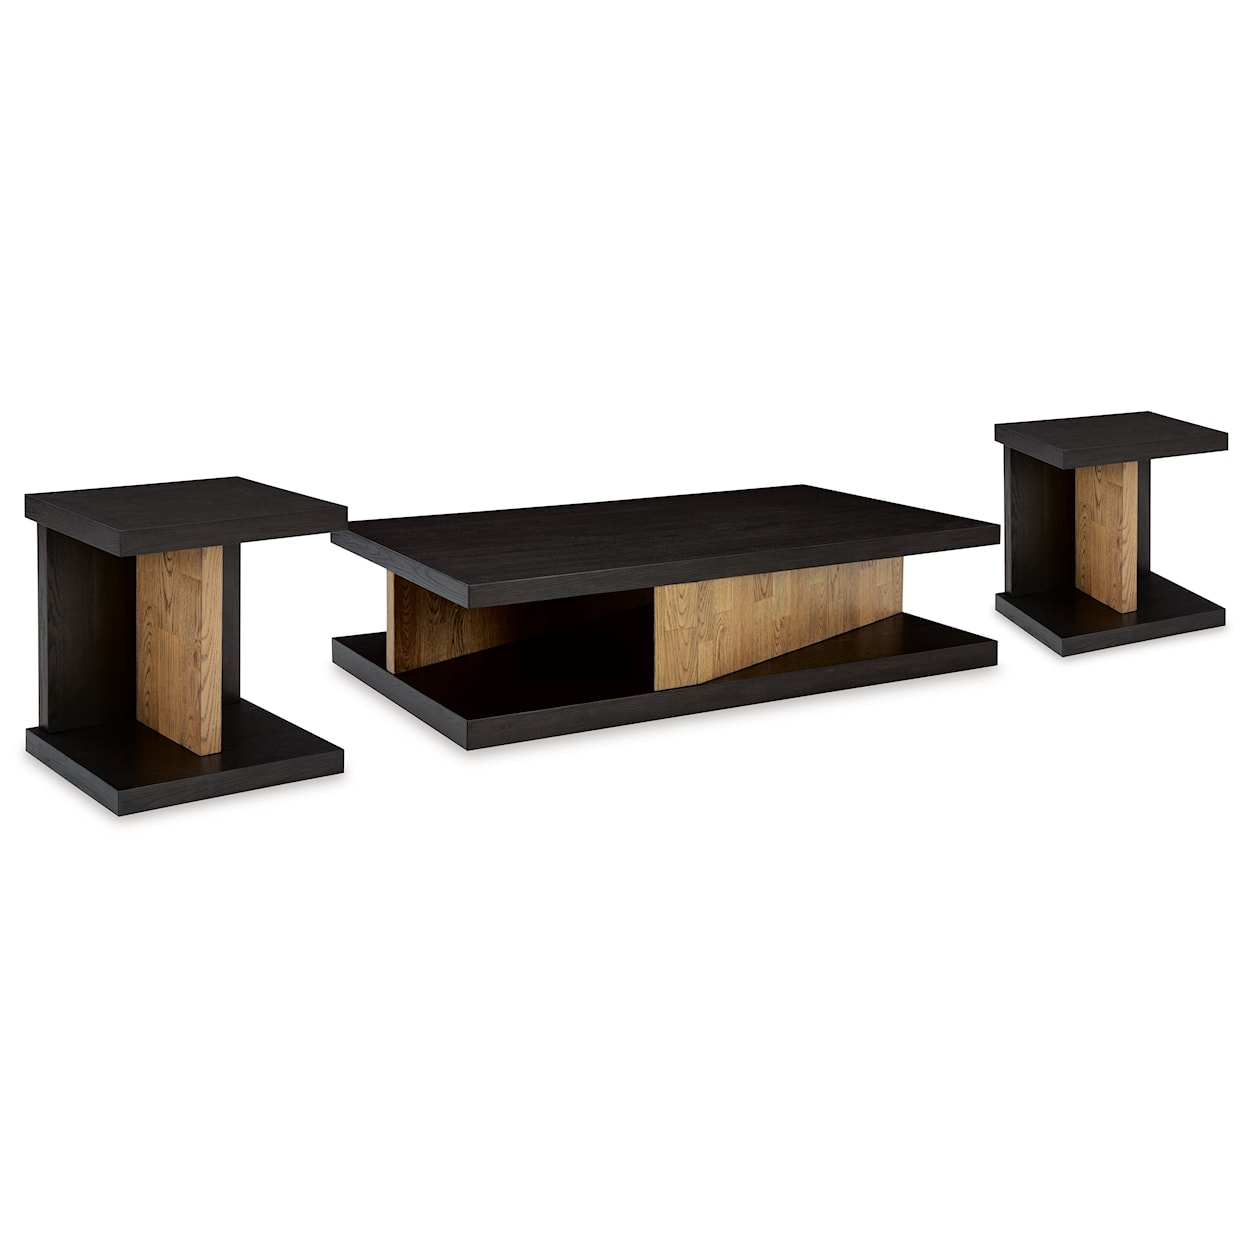 Benchcraft Kocomore Coffee Table And 2 Chairside End Tables